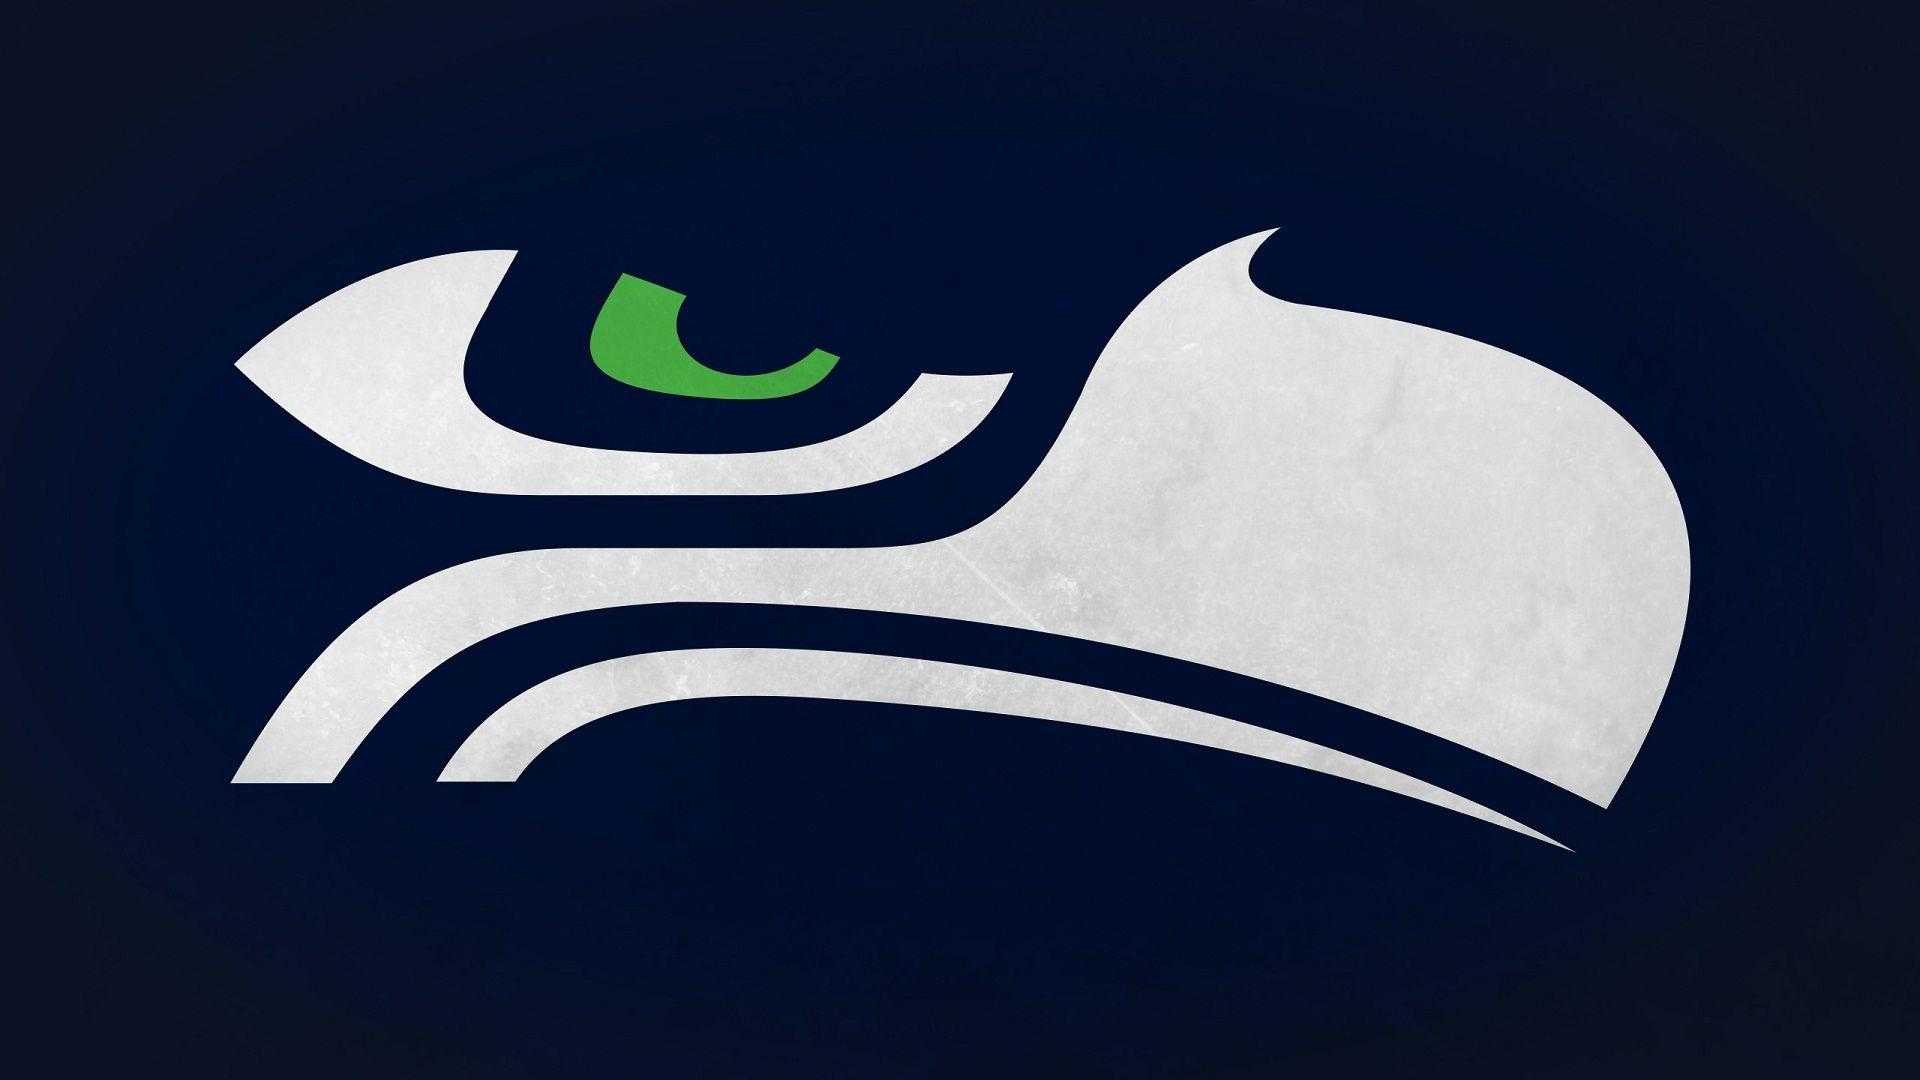 Seattle Seahawks Wallpaper with high-resolution 1920x1080 pixel. You can use this wallpaper for your Mac or Windows Desktop Background, iPhone, Android or Tablet and another Smartphone device